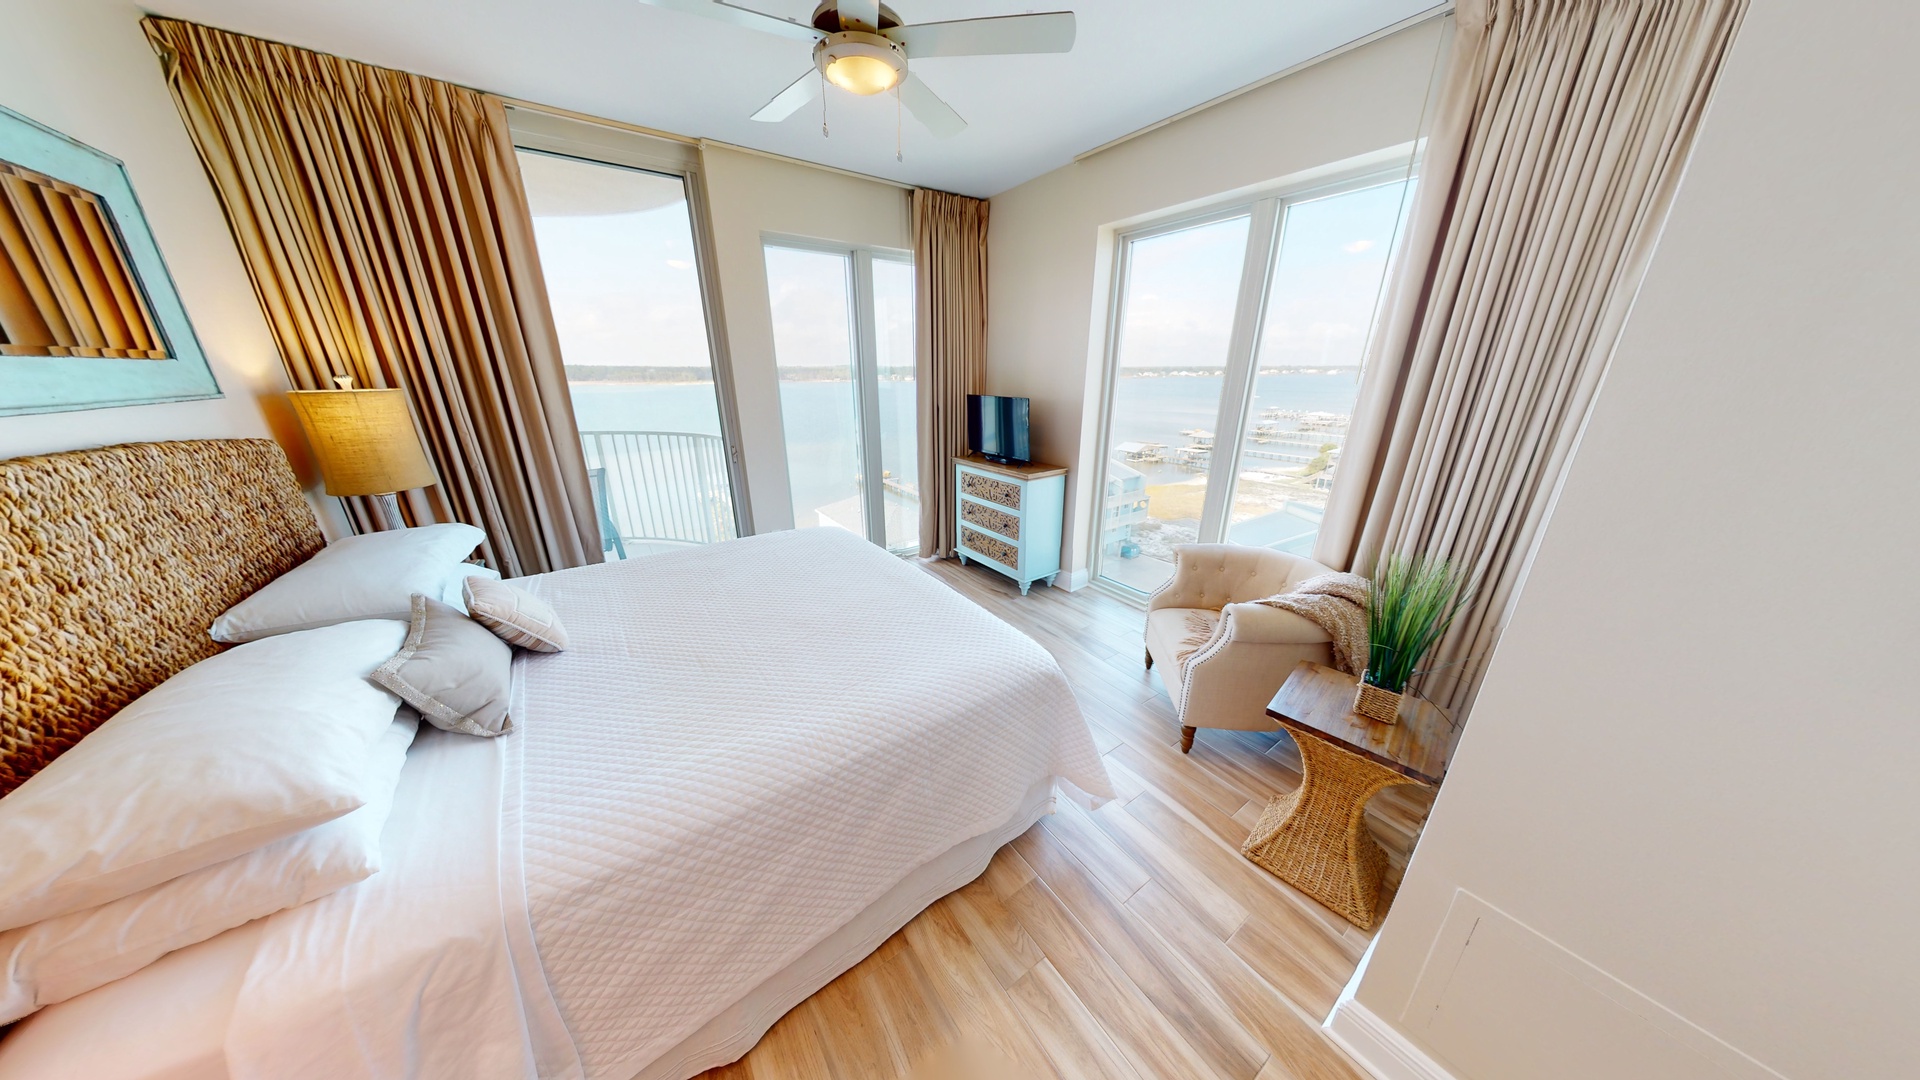 Bedroom 3 has a king bed, TV, water views and balcony access